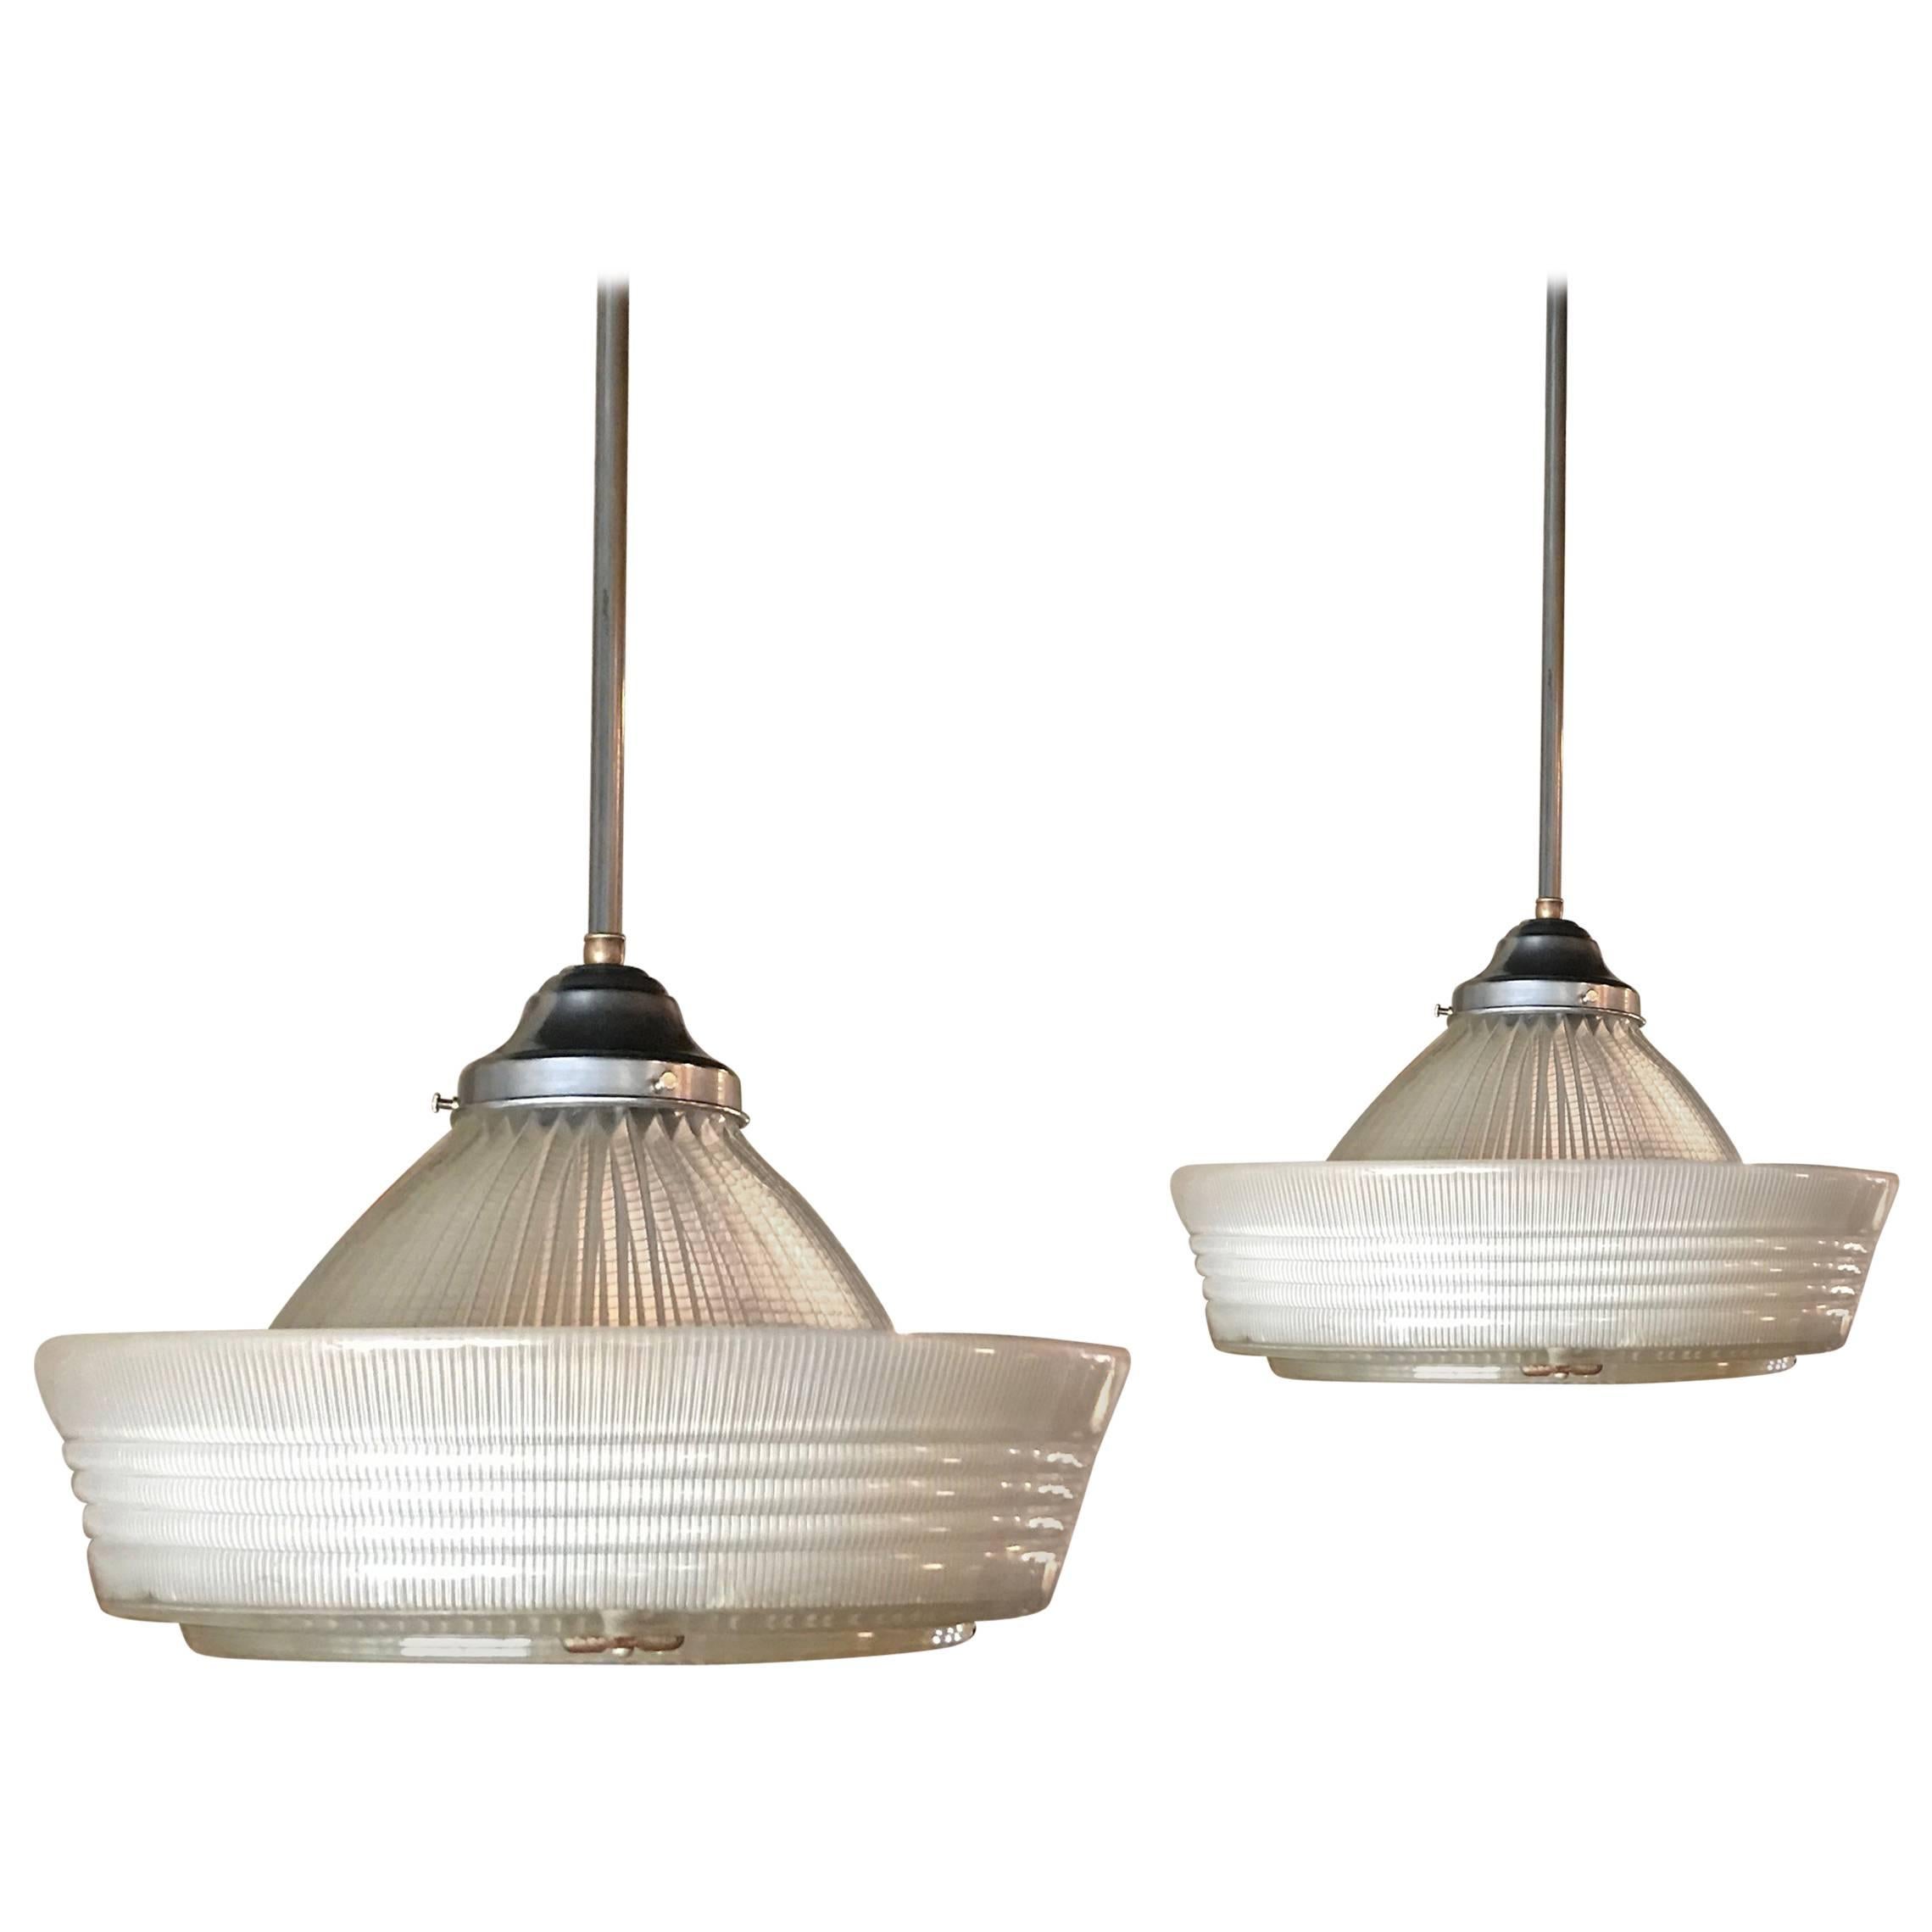 Pair of Industrial Brimmed Dome Prismatic Holophane Pendant Lights